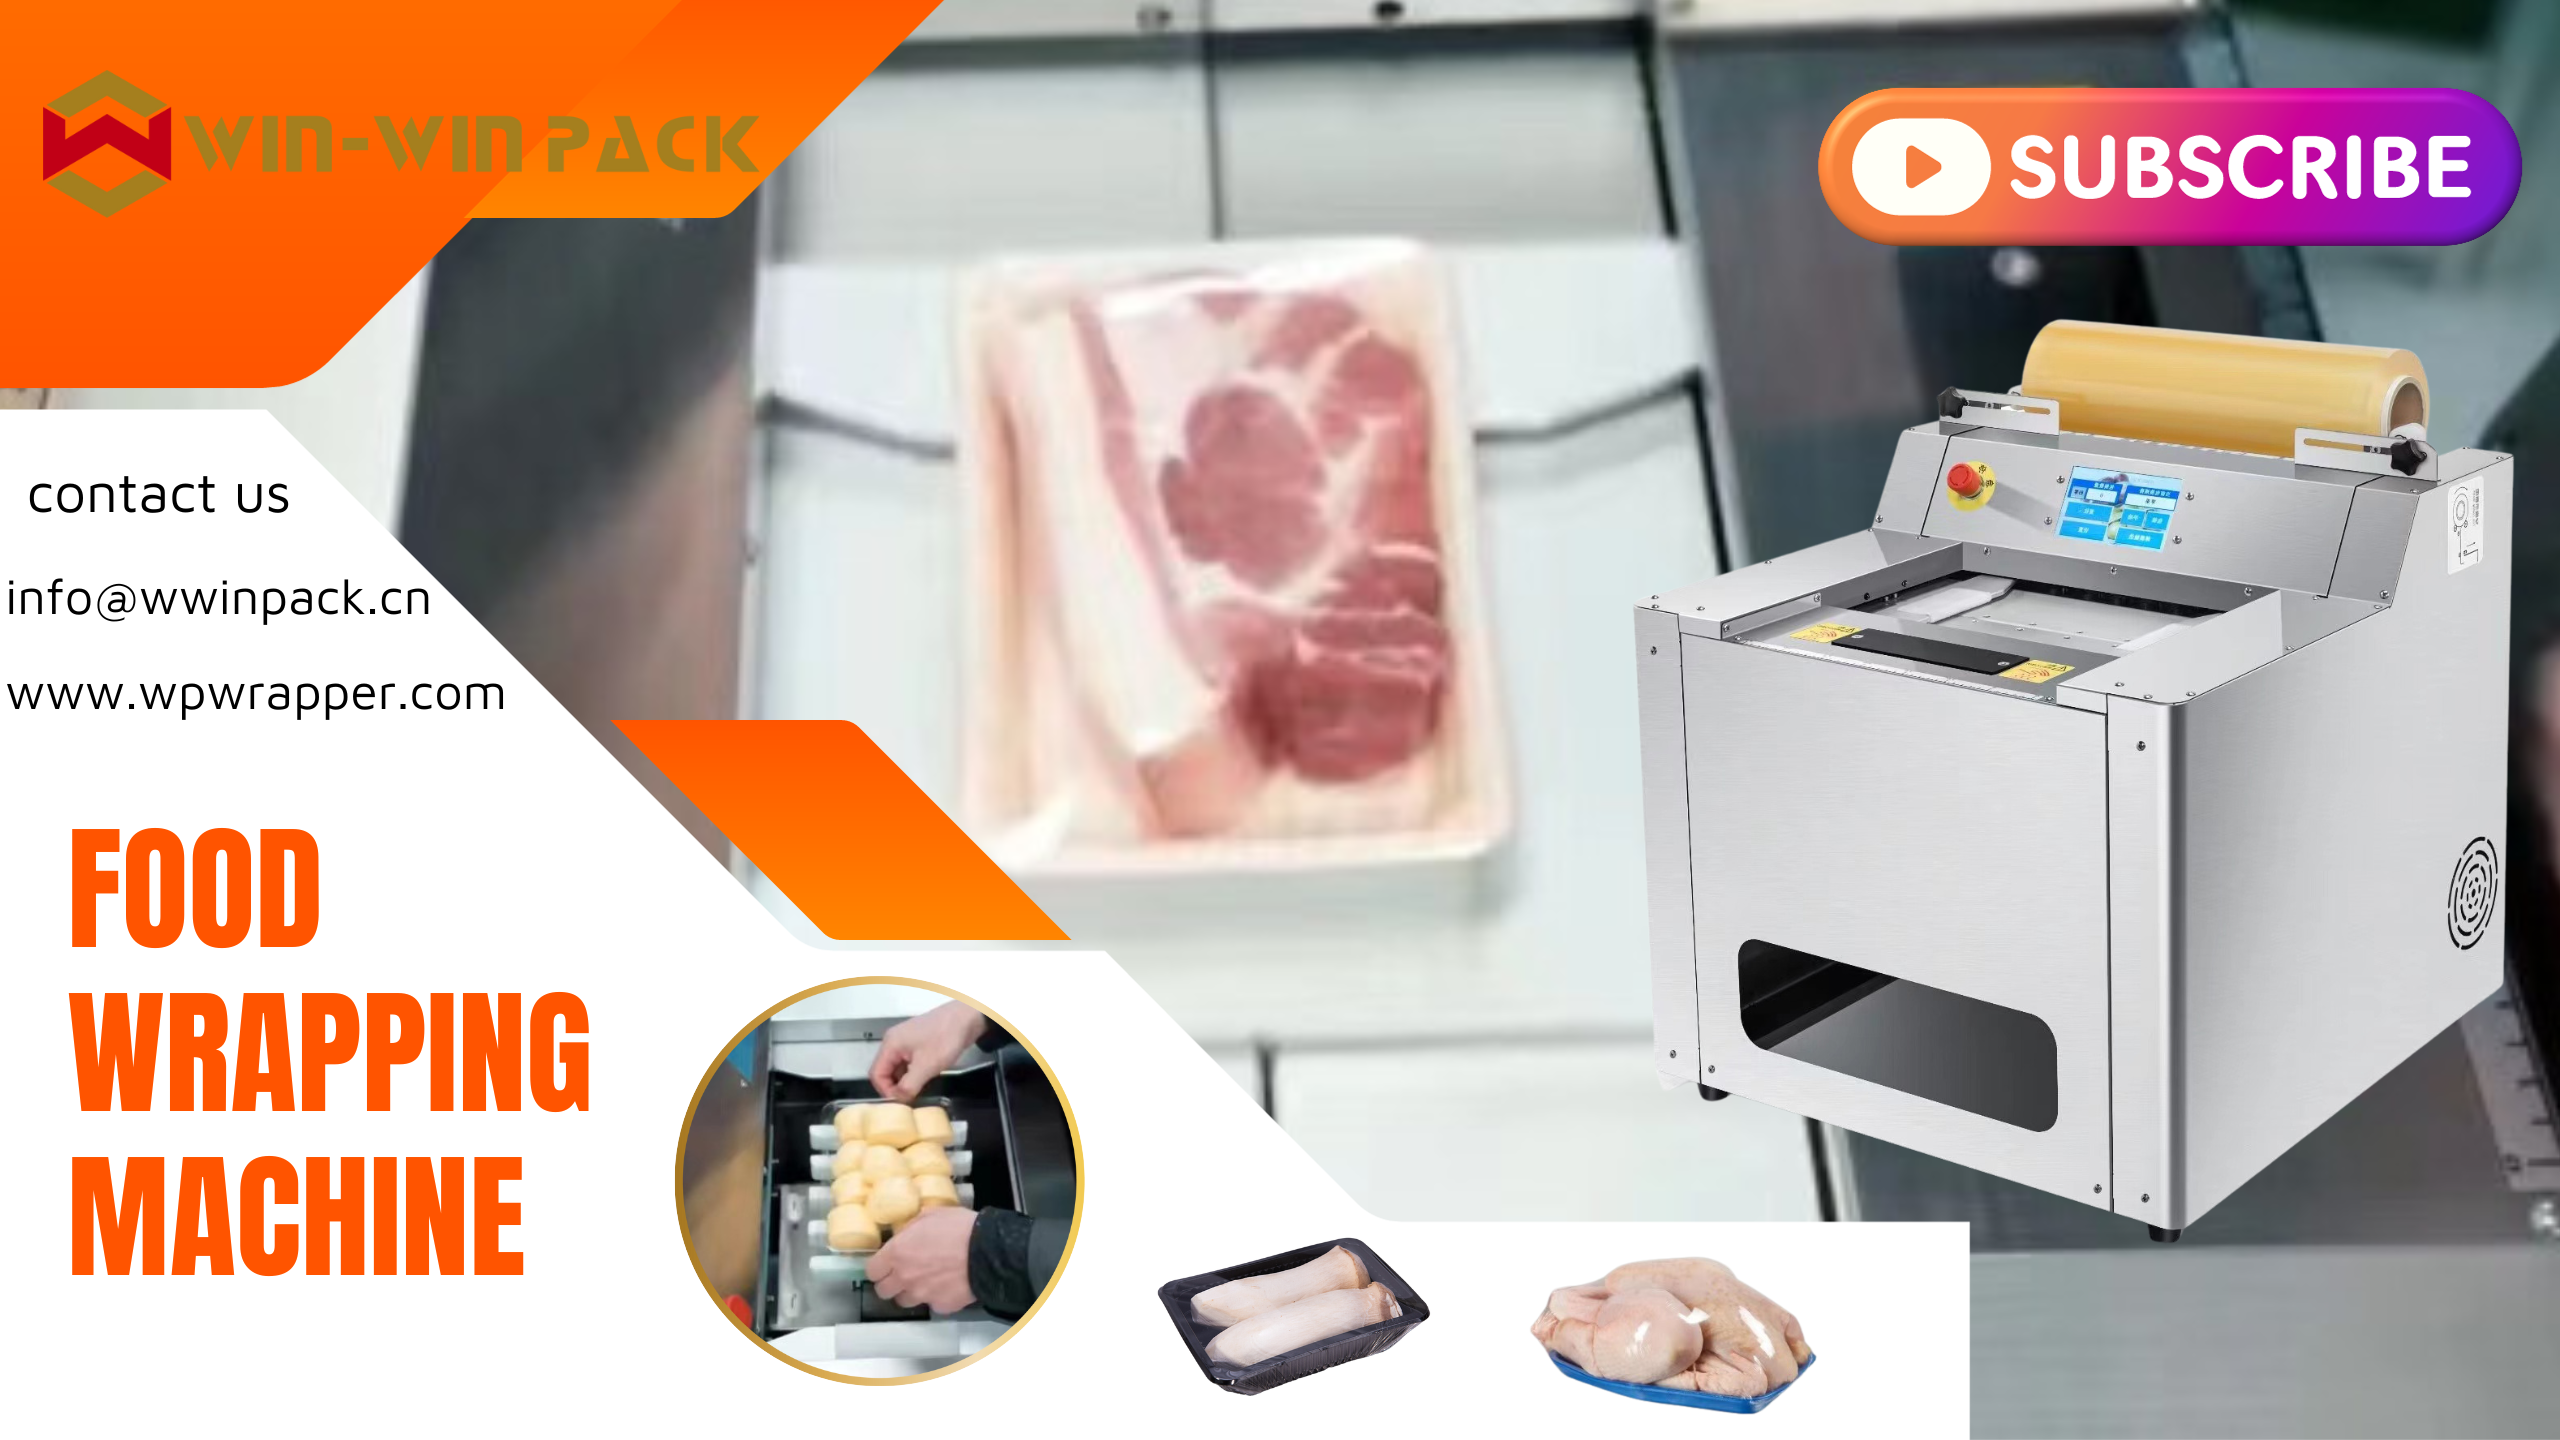 WIN-WIN PACK Efficient Productivity Food Wrapping Machine for Pack Vegetables